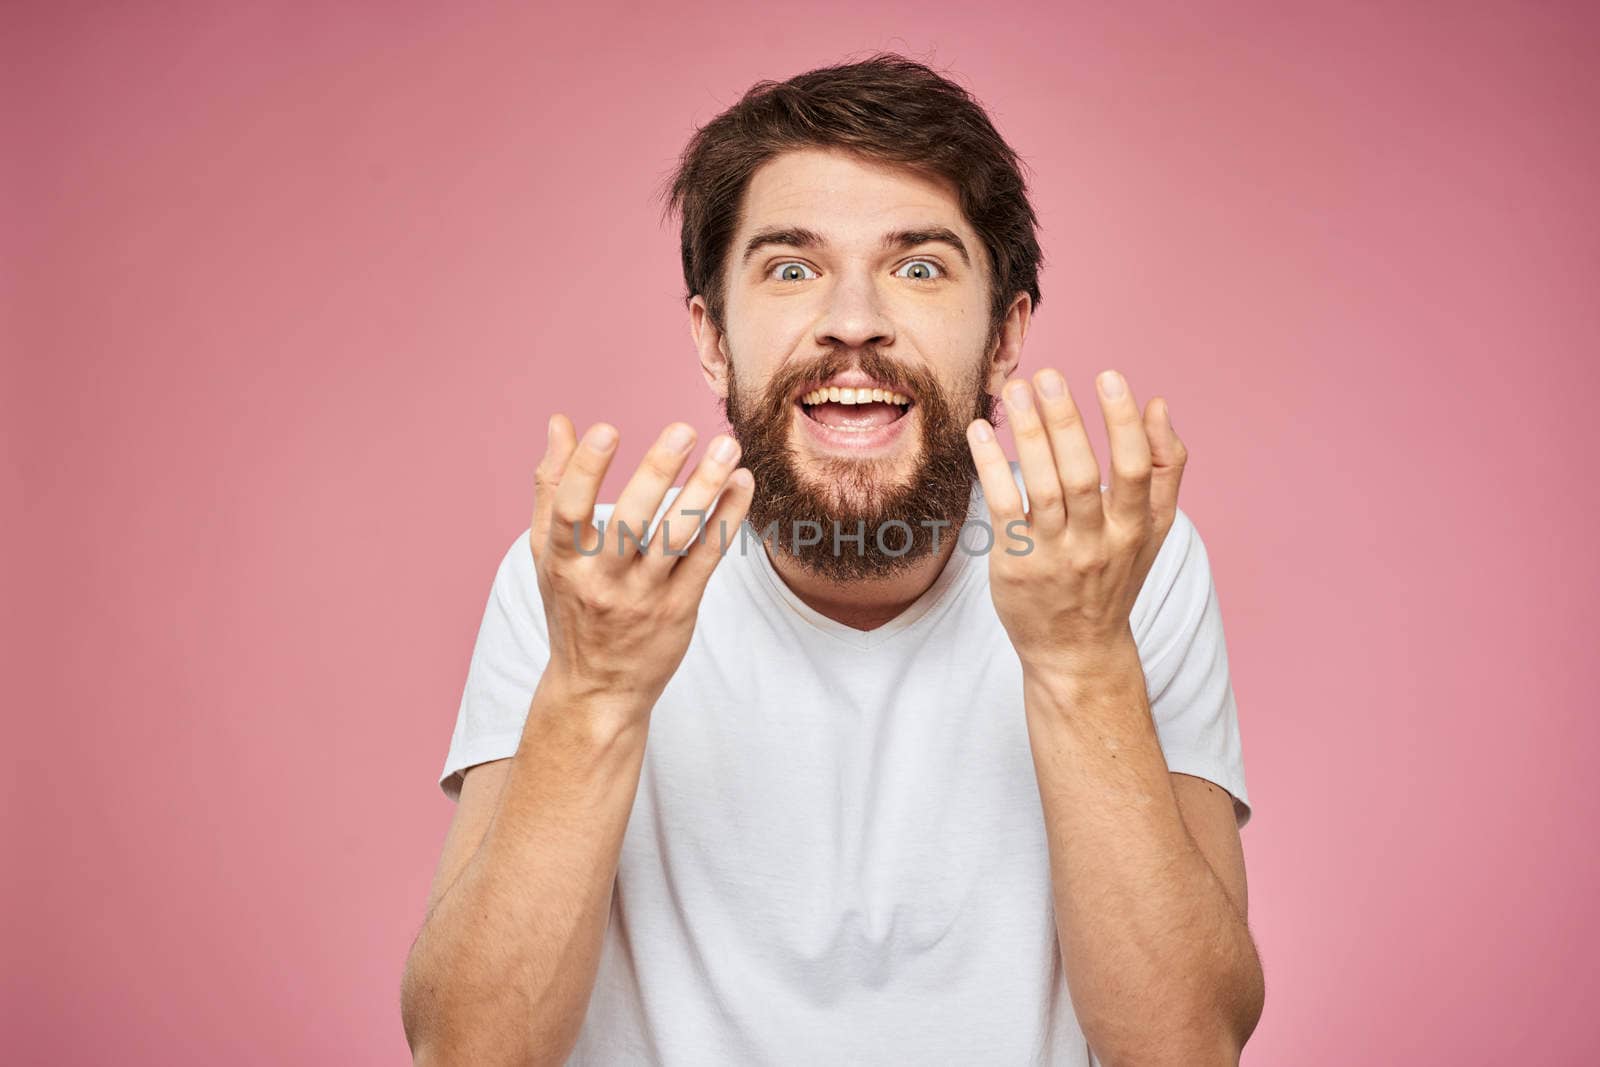 man in white t-shirt gesturing with his hands emotions fun pink background. High quality photo